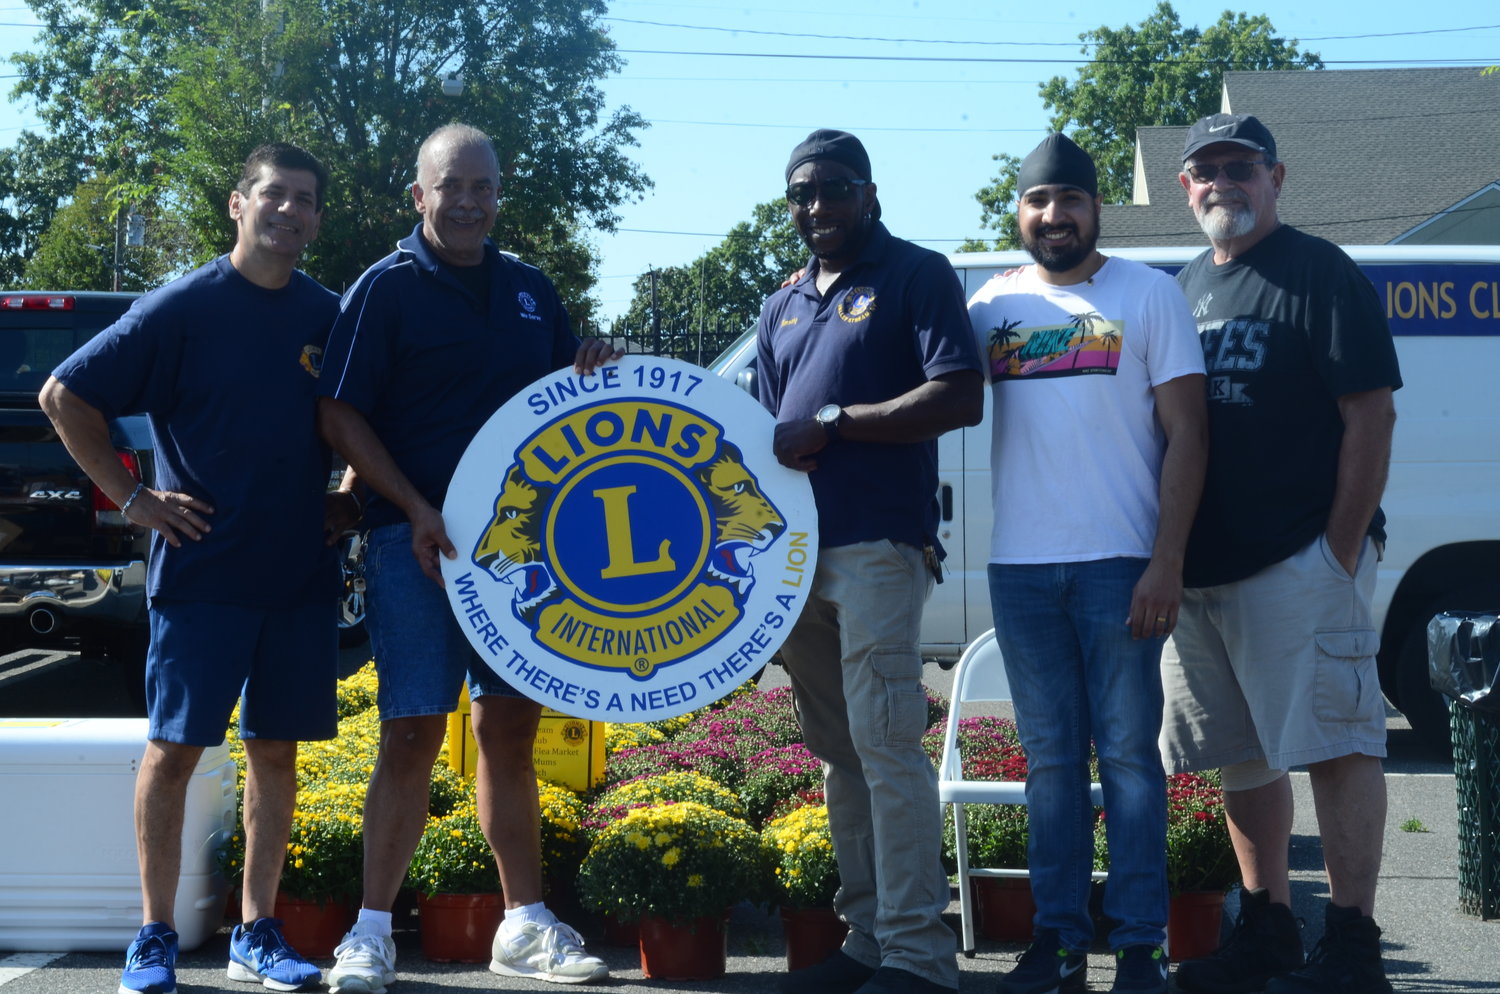 Lions club members, from left, Dave Basile, Jose Pastrama, Timothy Lawton, Josh Anand and Jim Zabata.